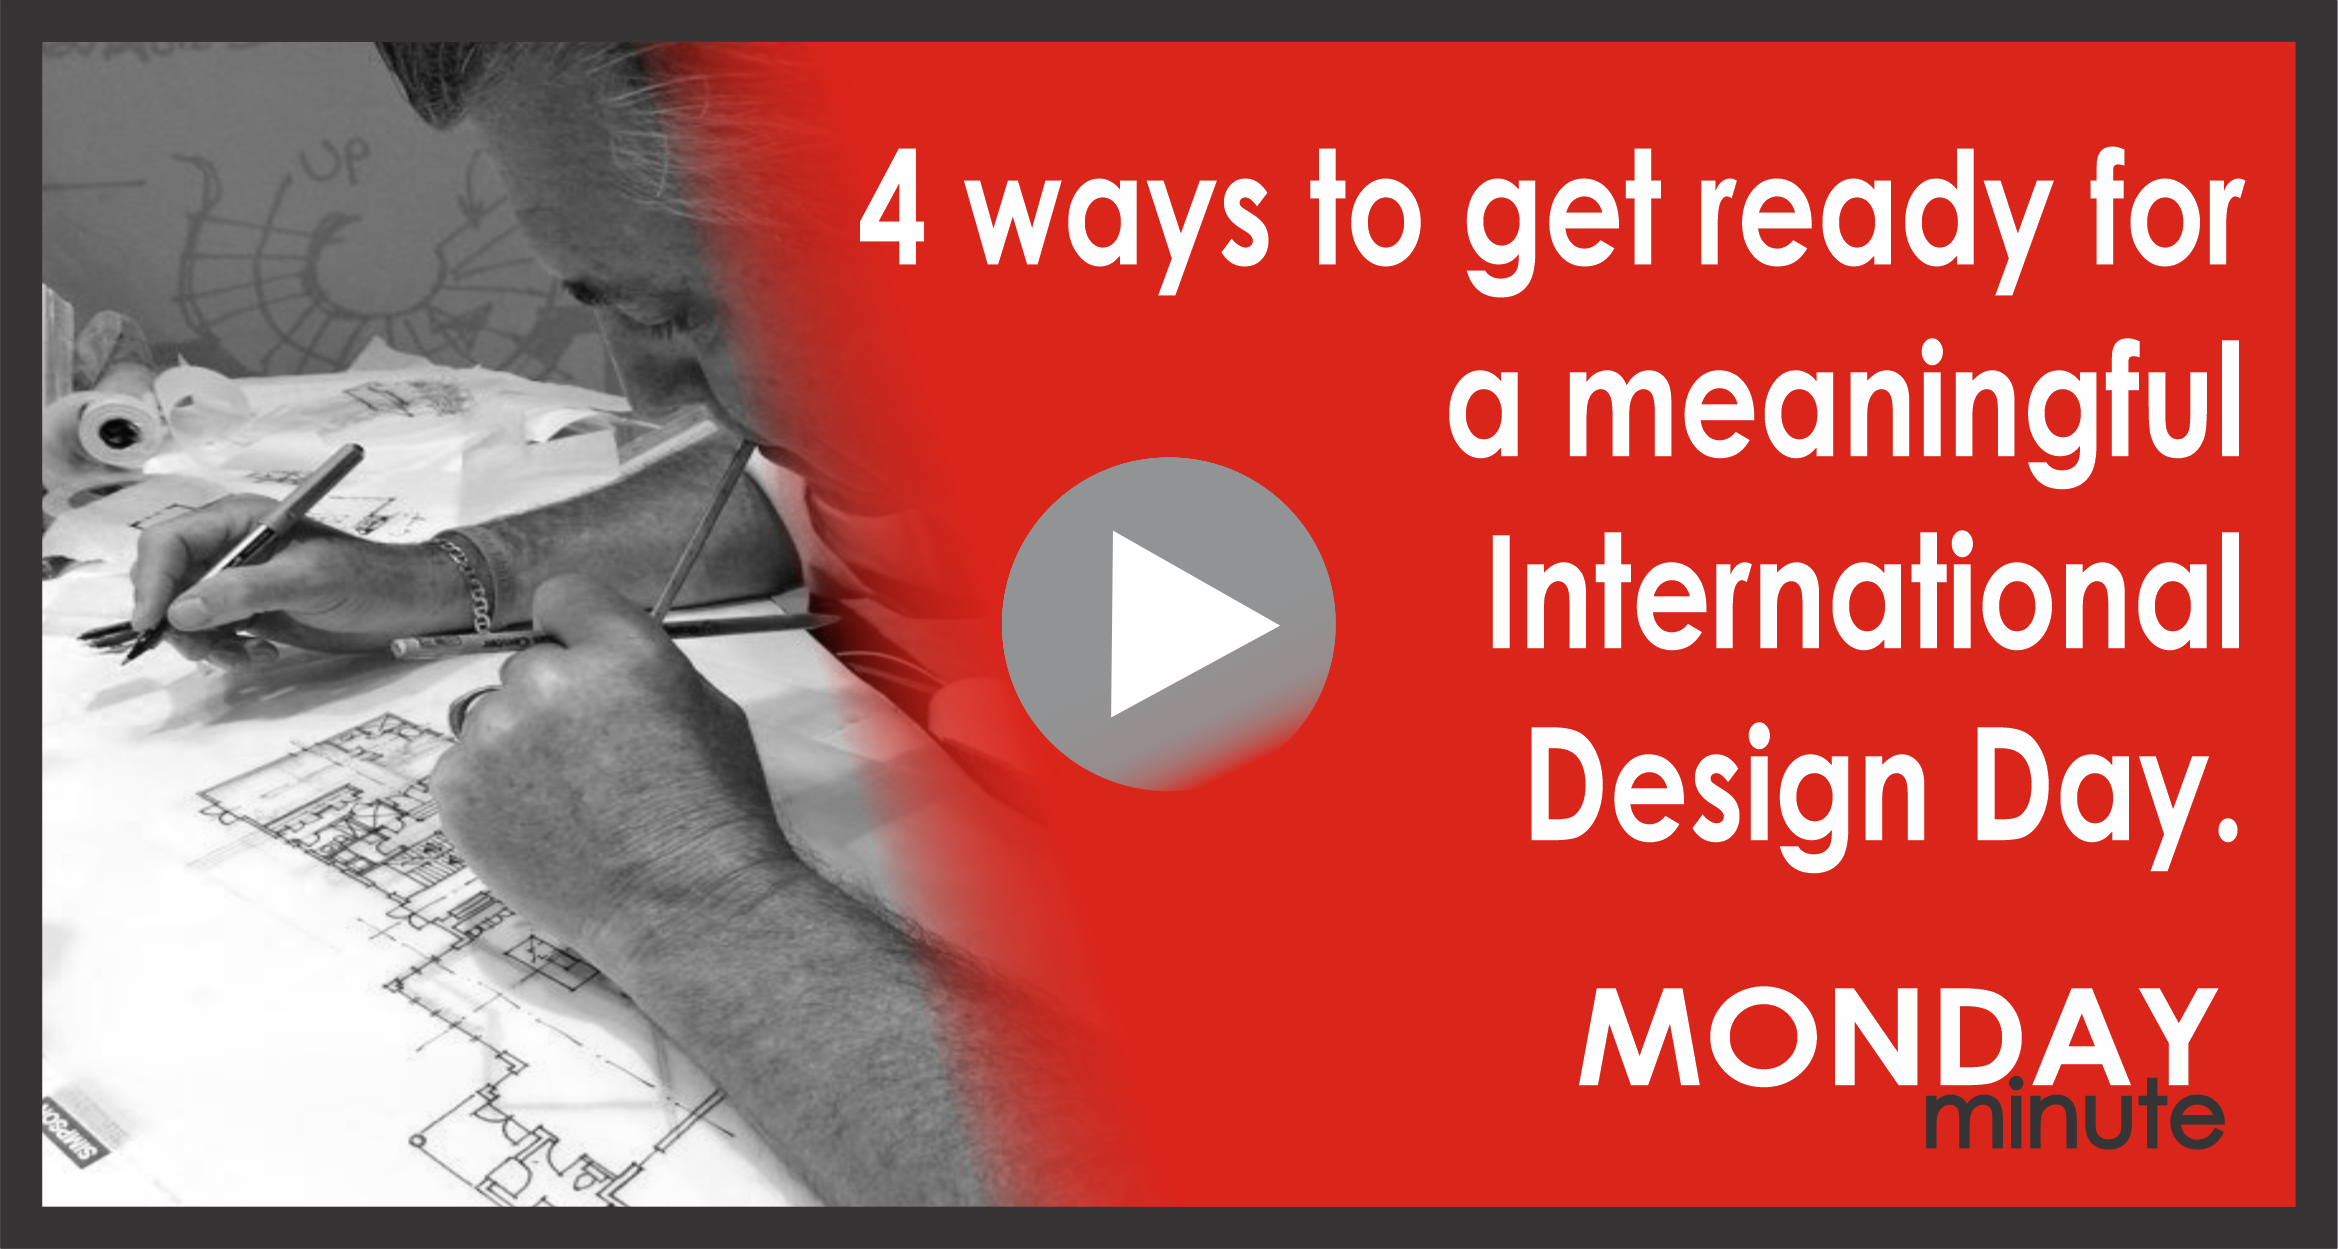 4 ways to get ready for a meaningful International Design Day. [Monday Minute]